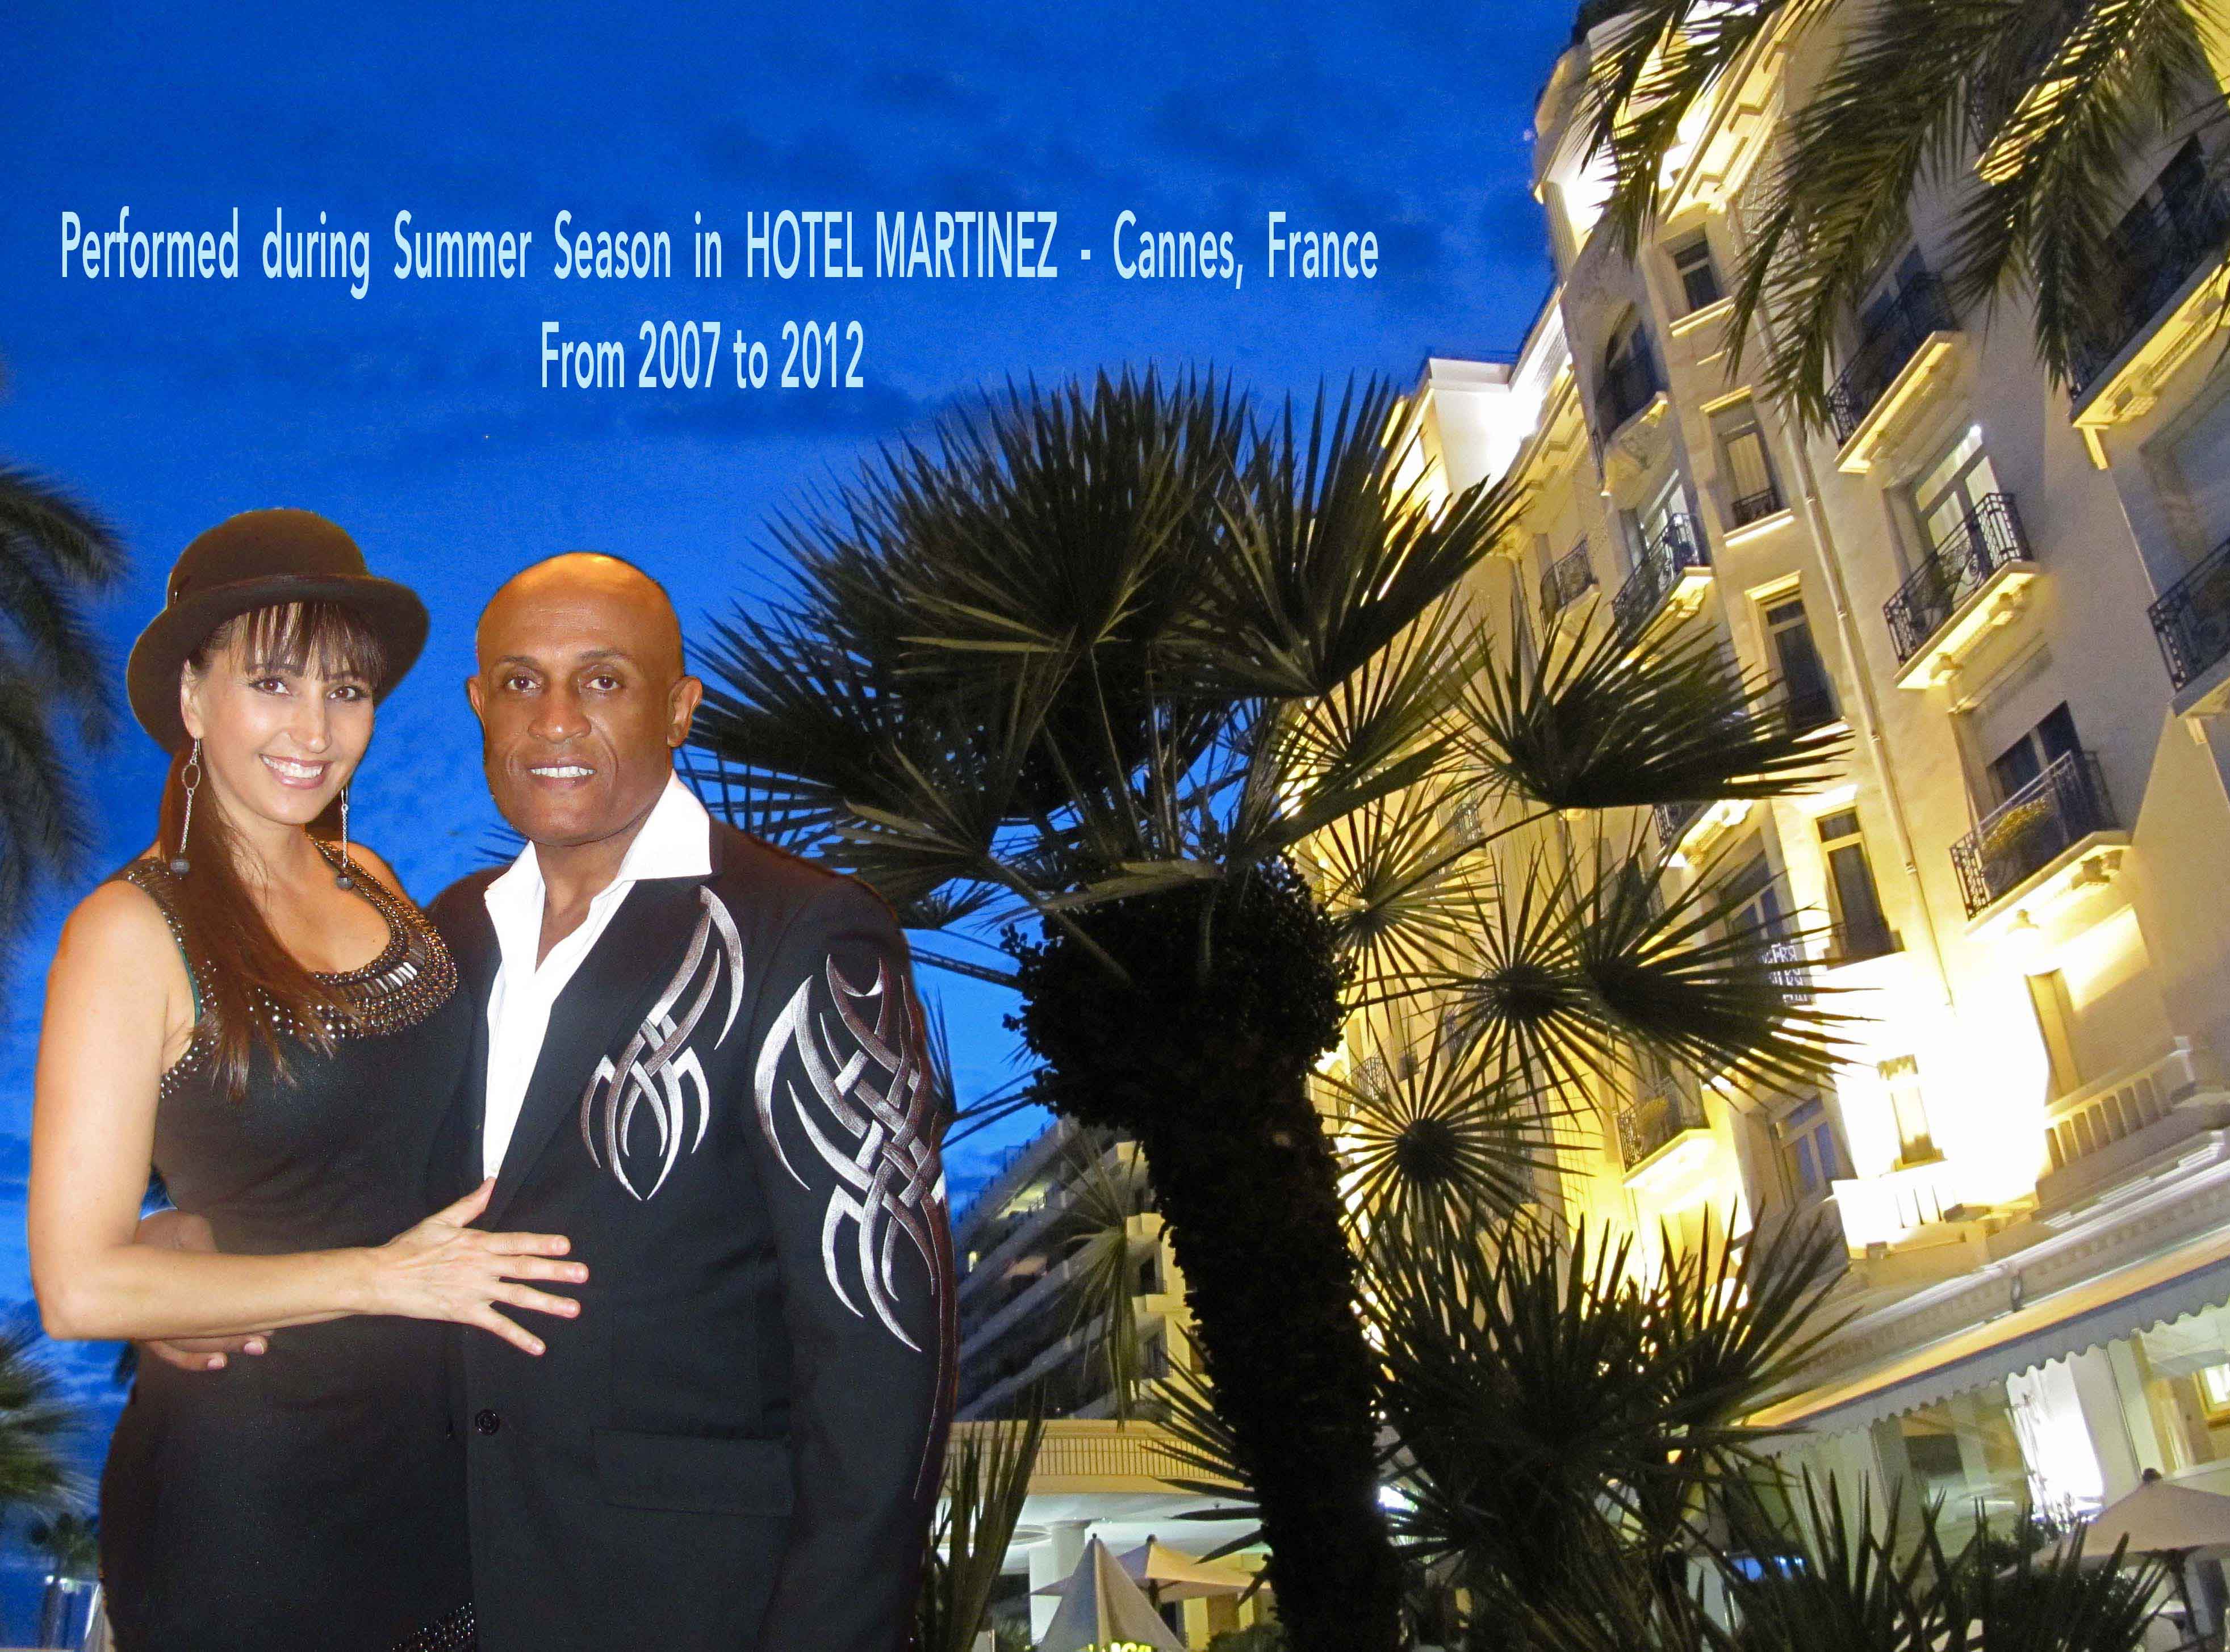 from 2007 to 2013 Performing during the Summer season in the famous Hotel Martinez